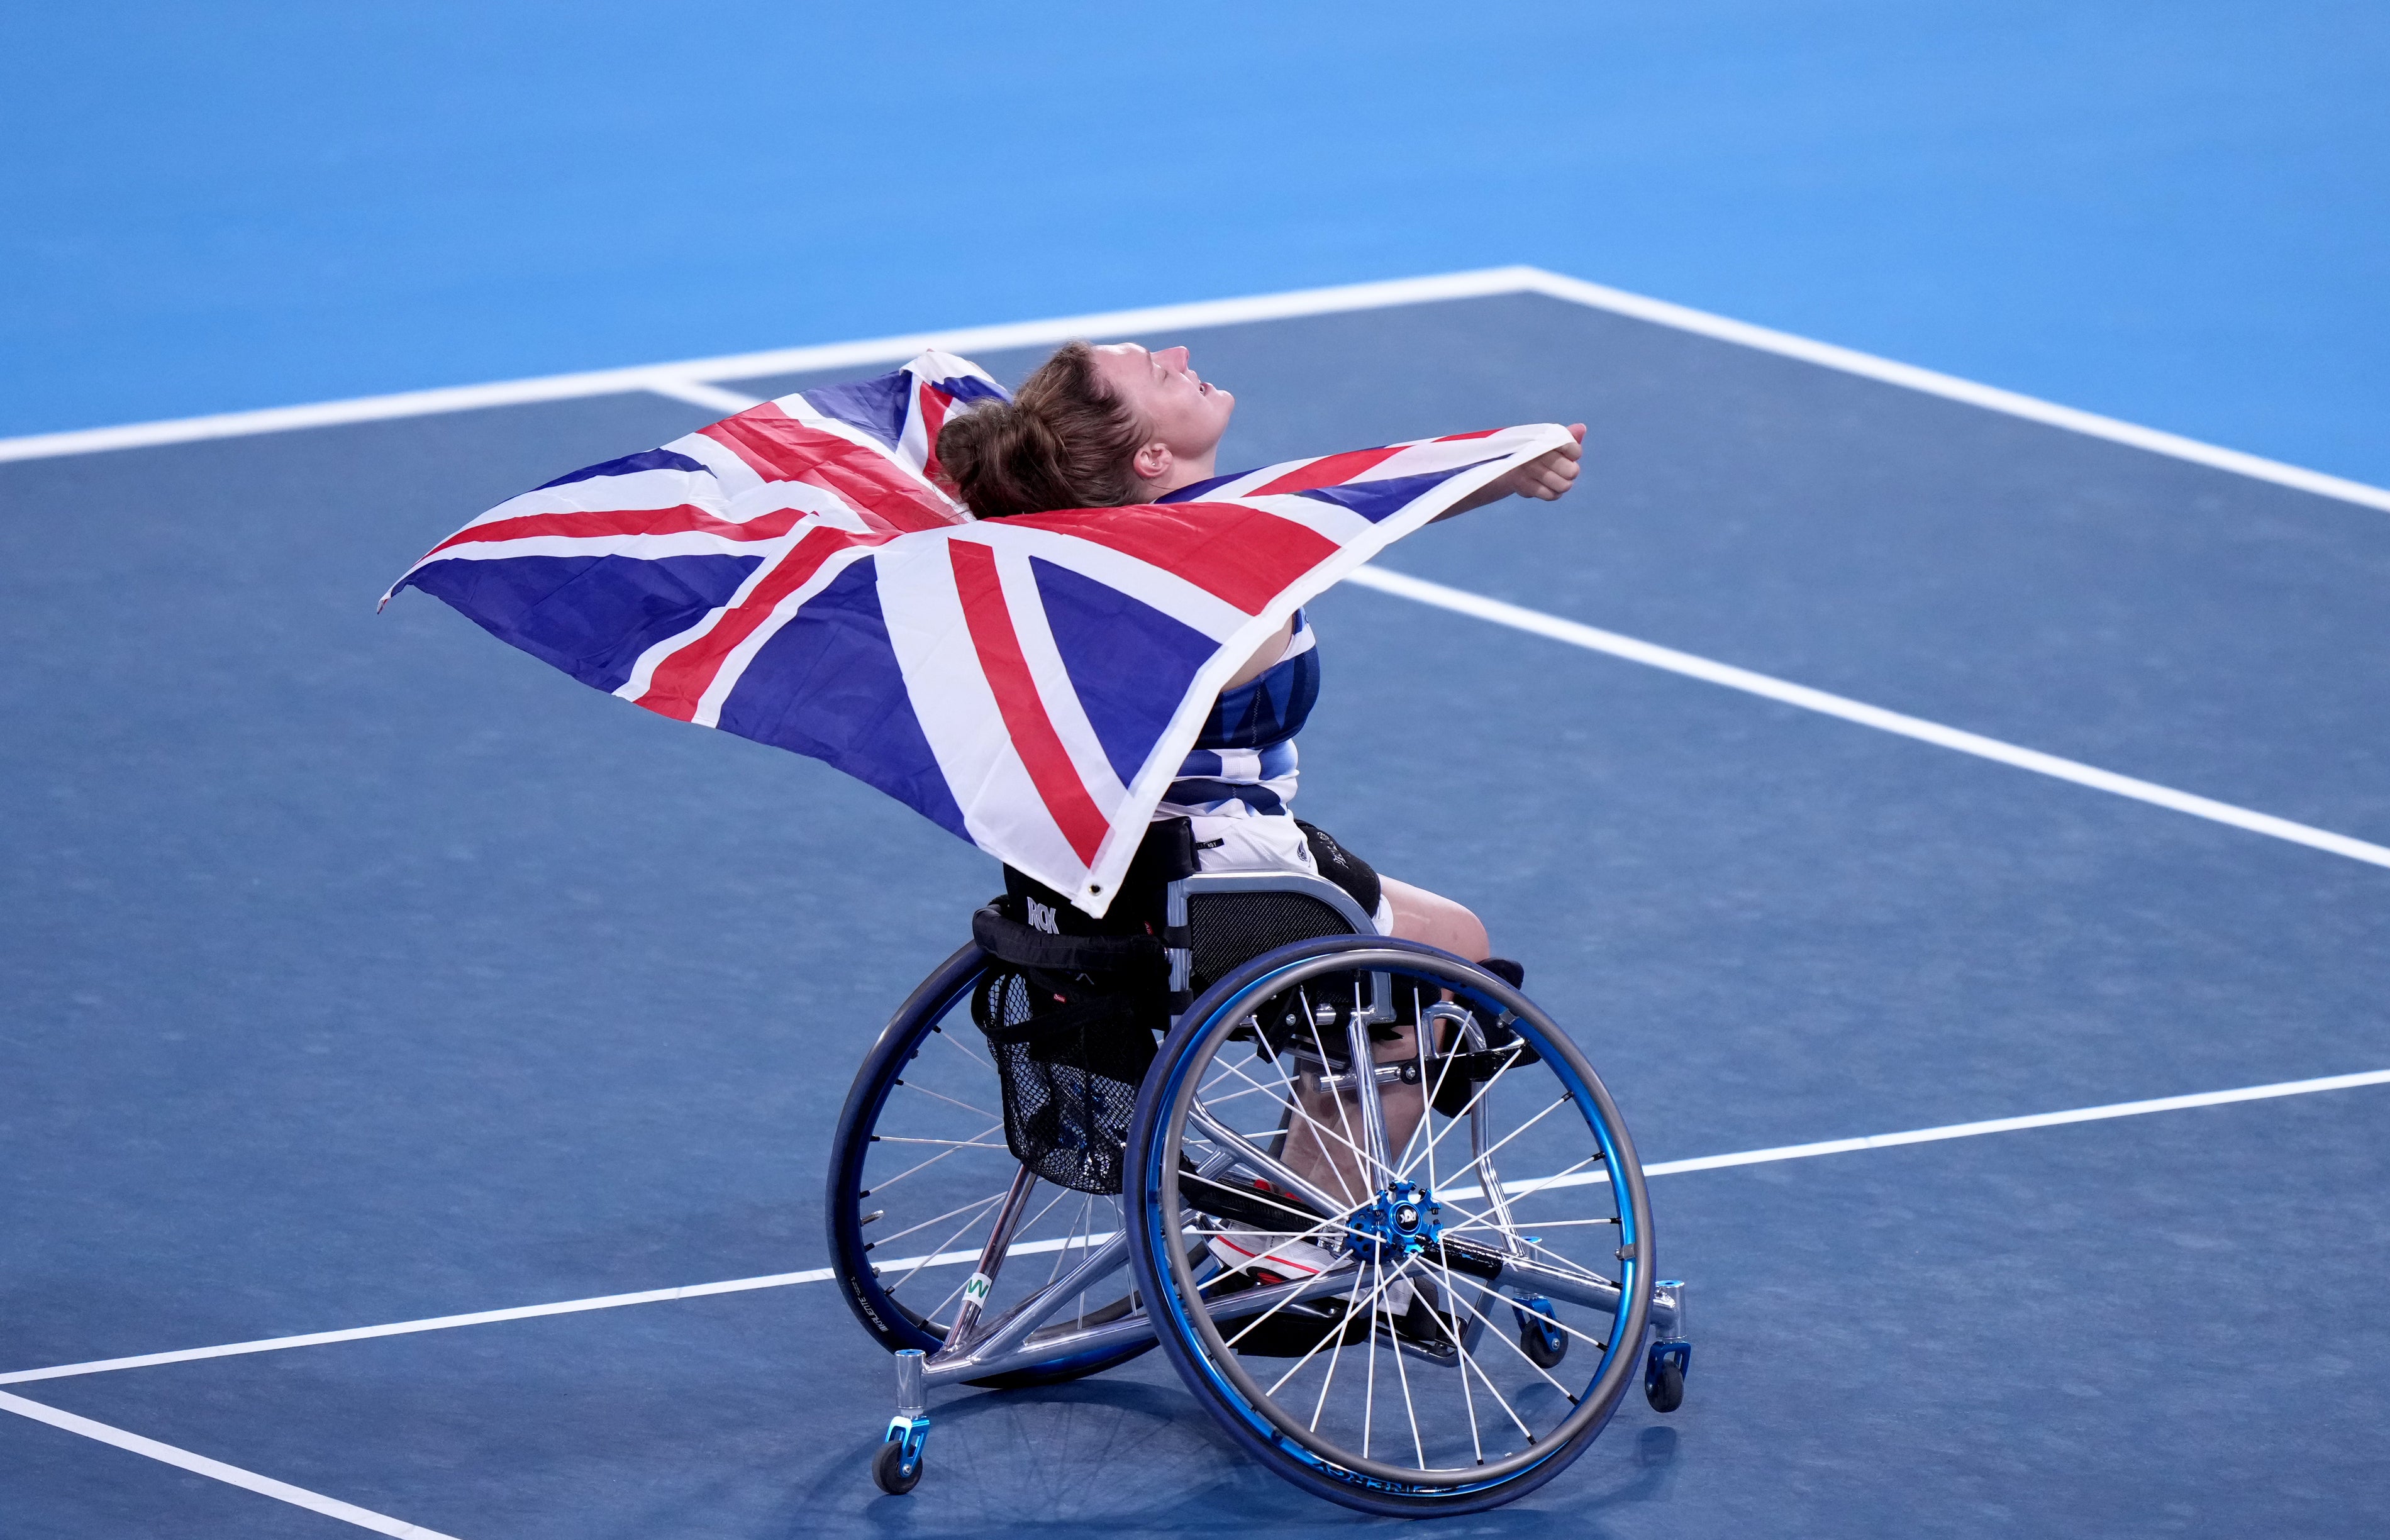 Jordanne Whiley celebrates after winning the women’s singles bronze medal match (Tim Goode/PA)